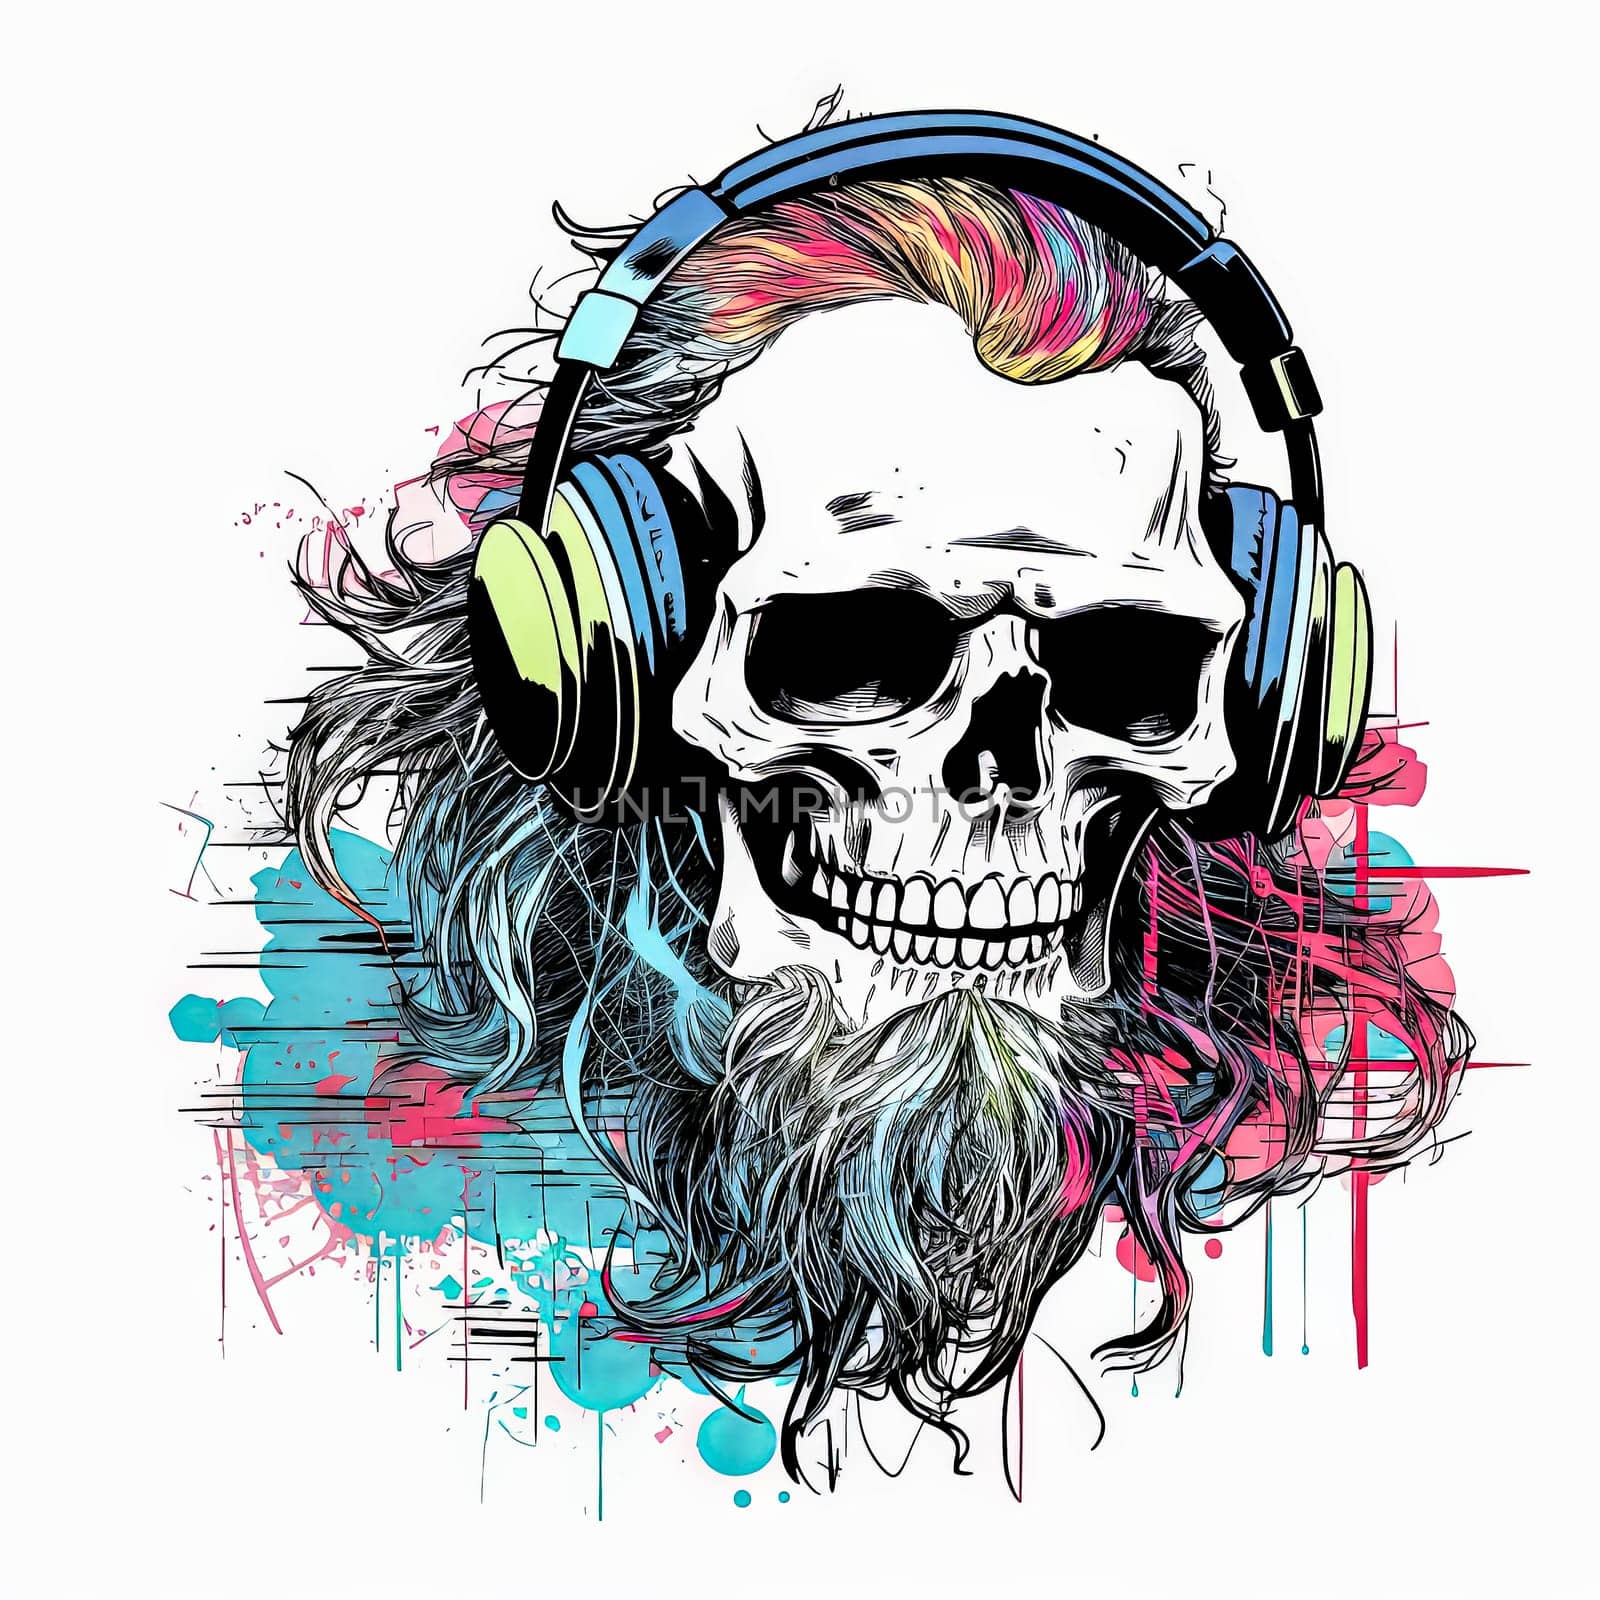 Skull with headphones on it. by Alla_Morozova93